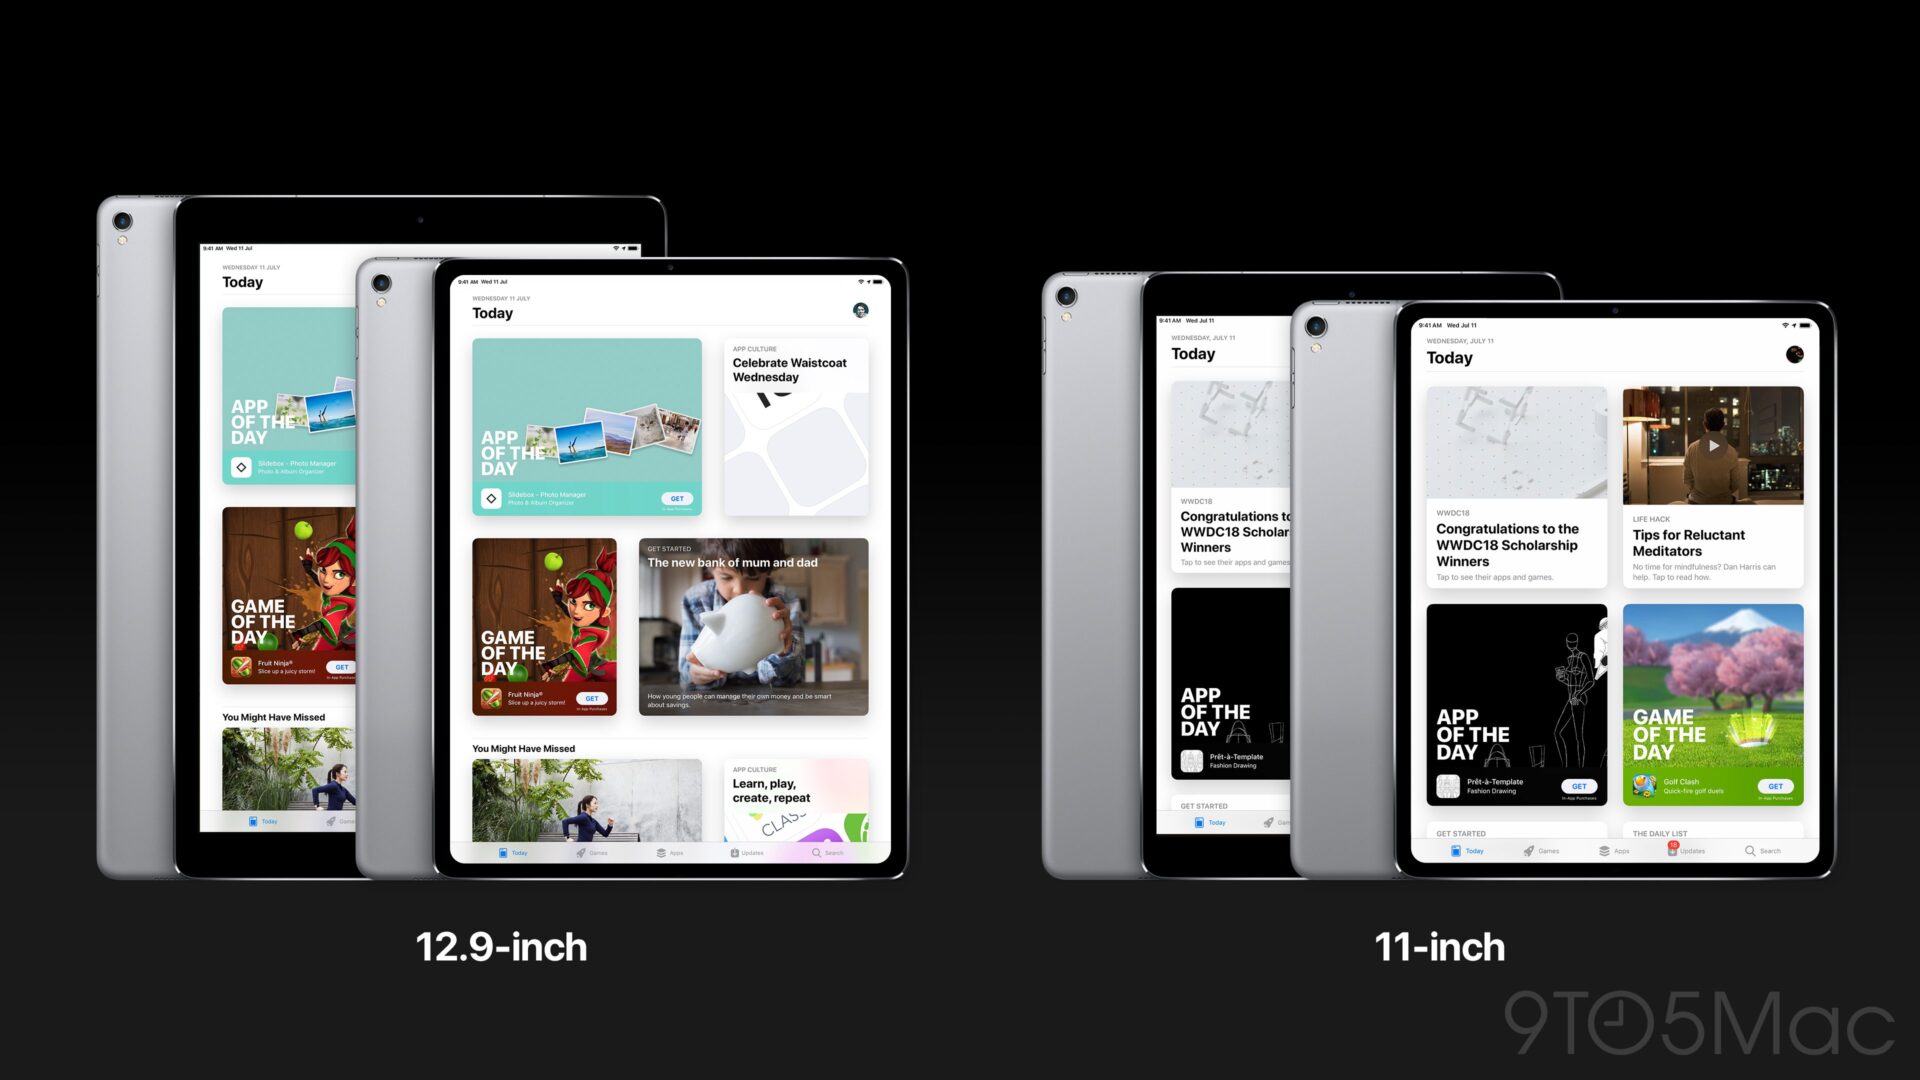 New leaks suggests Apple iPad Pro will drop 3.5mm headphone jack but will have a bezel-less display, Face ID